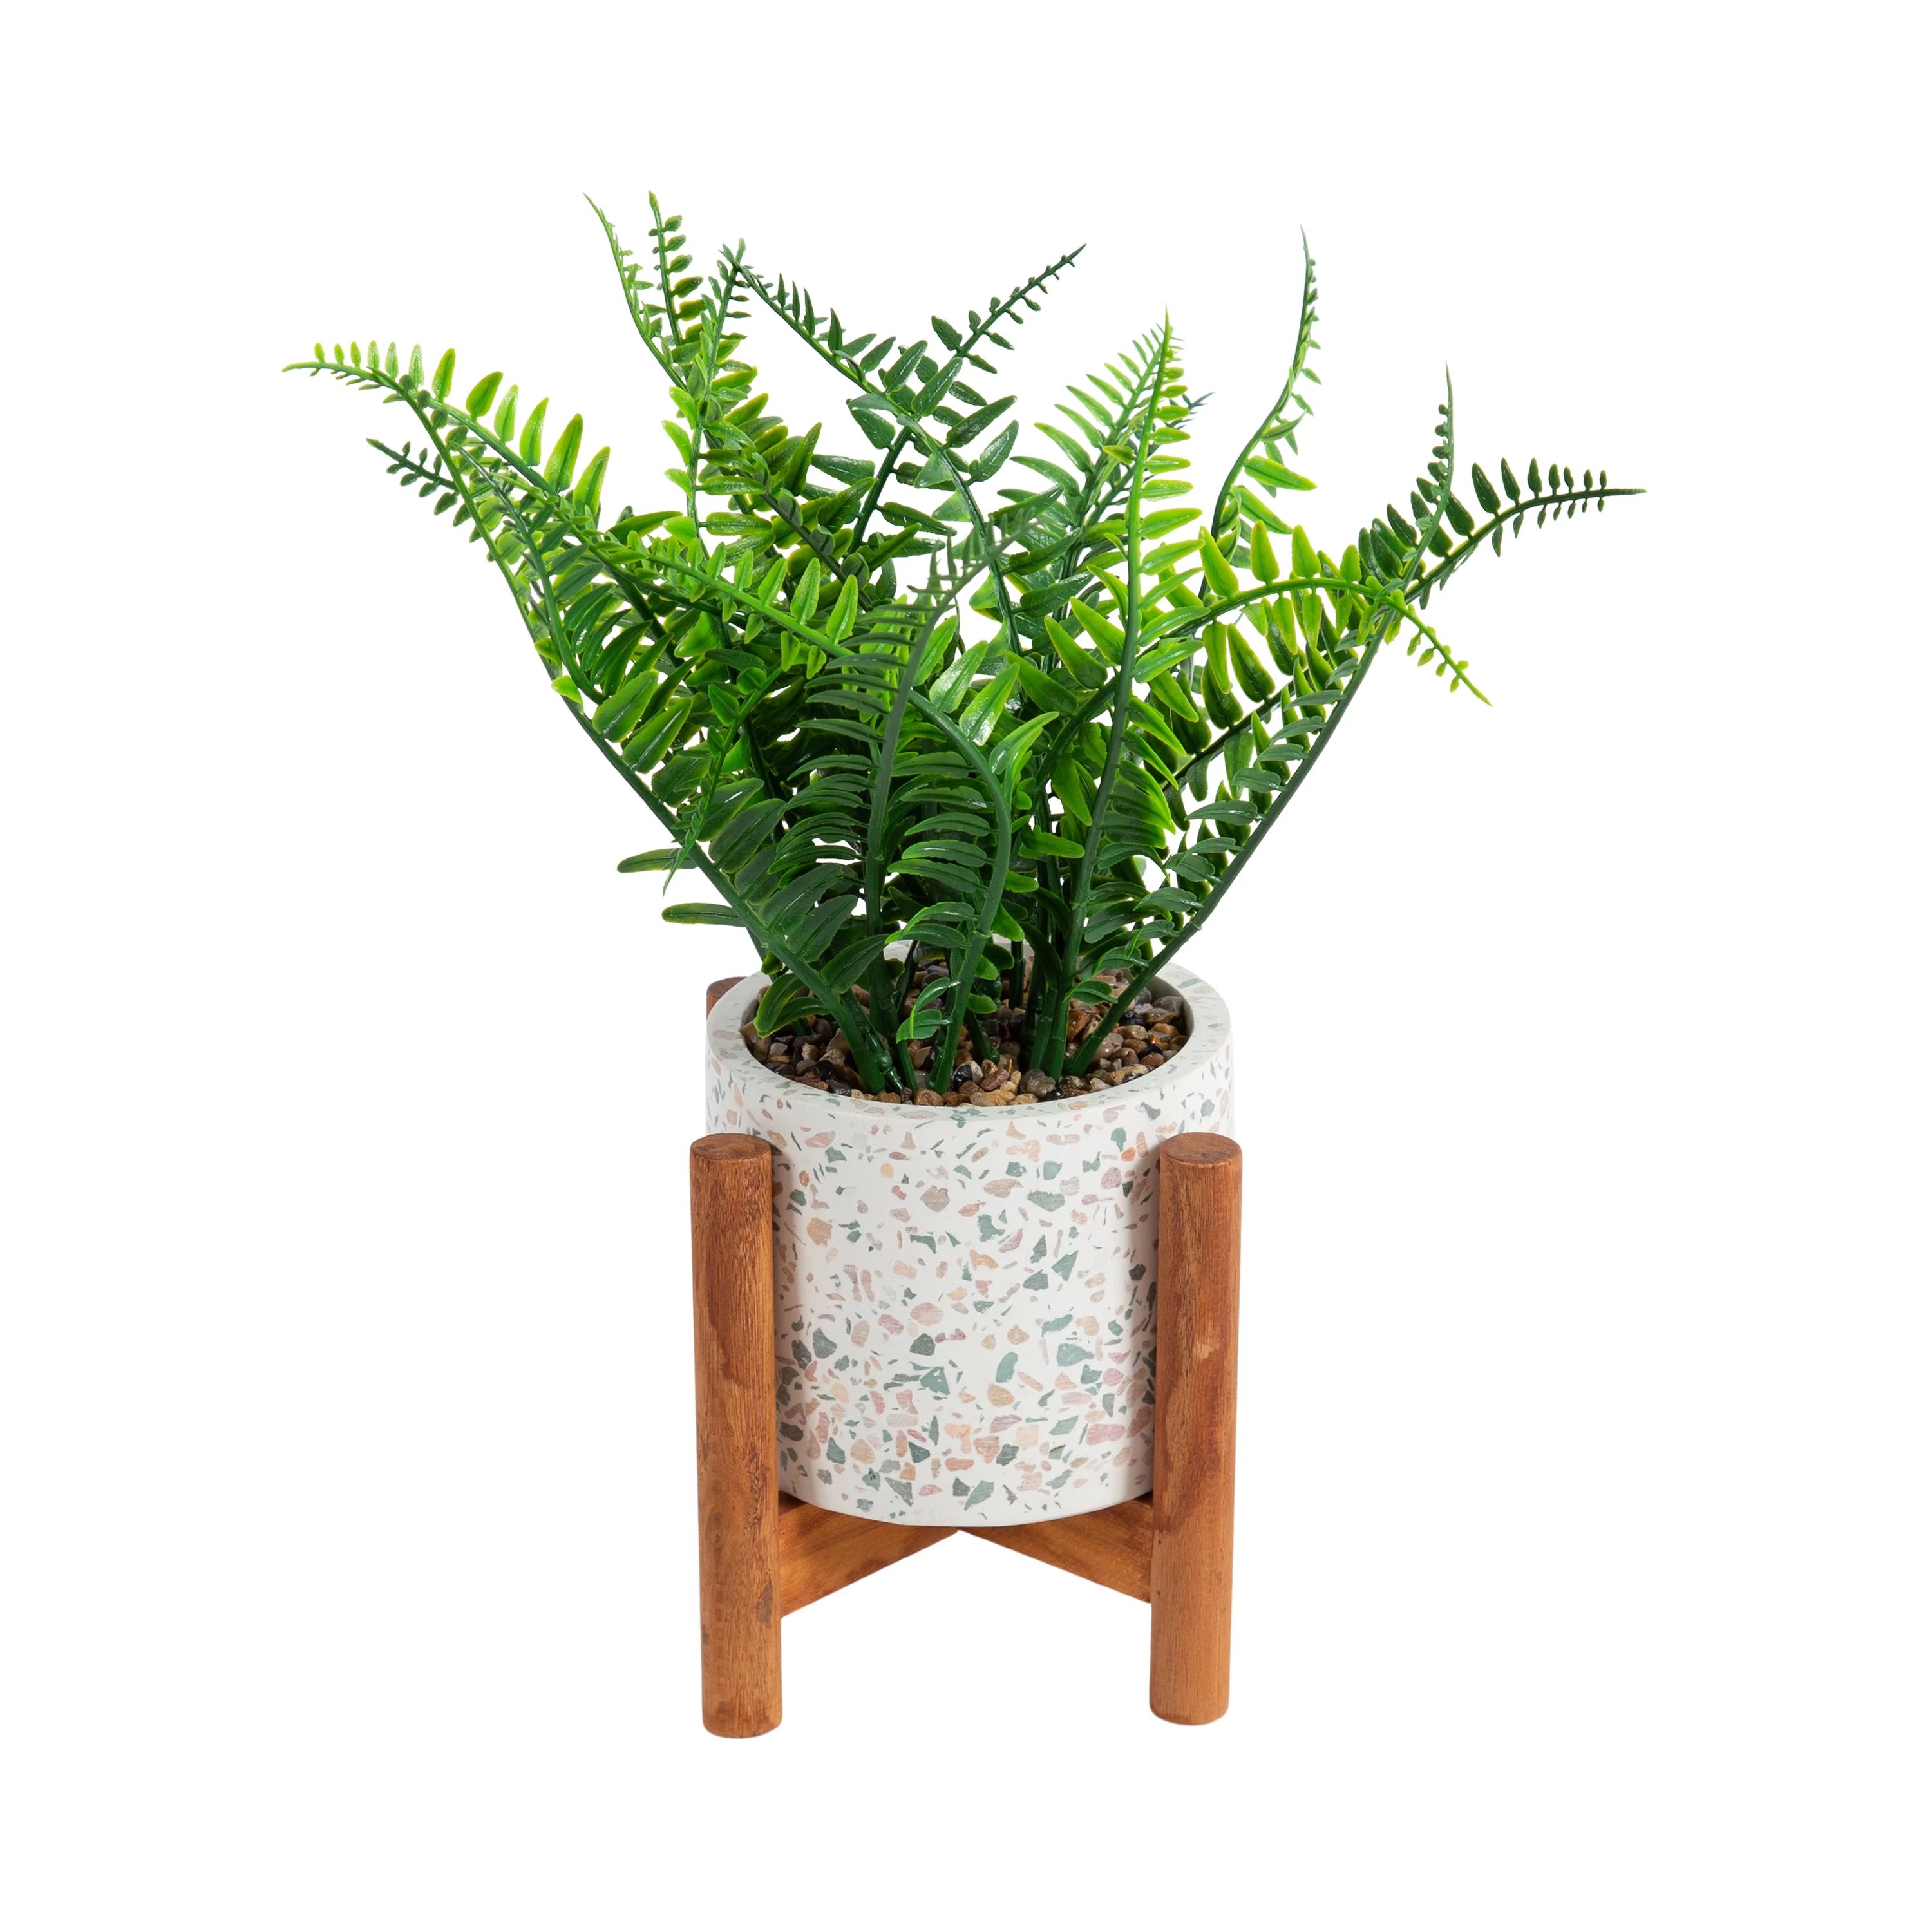 Design Ovation 10.5” x 3.875” Artificial Fern in Terrazo w/ Wooden Stand Plant Container | Walmart (US)